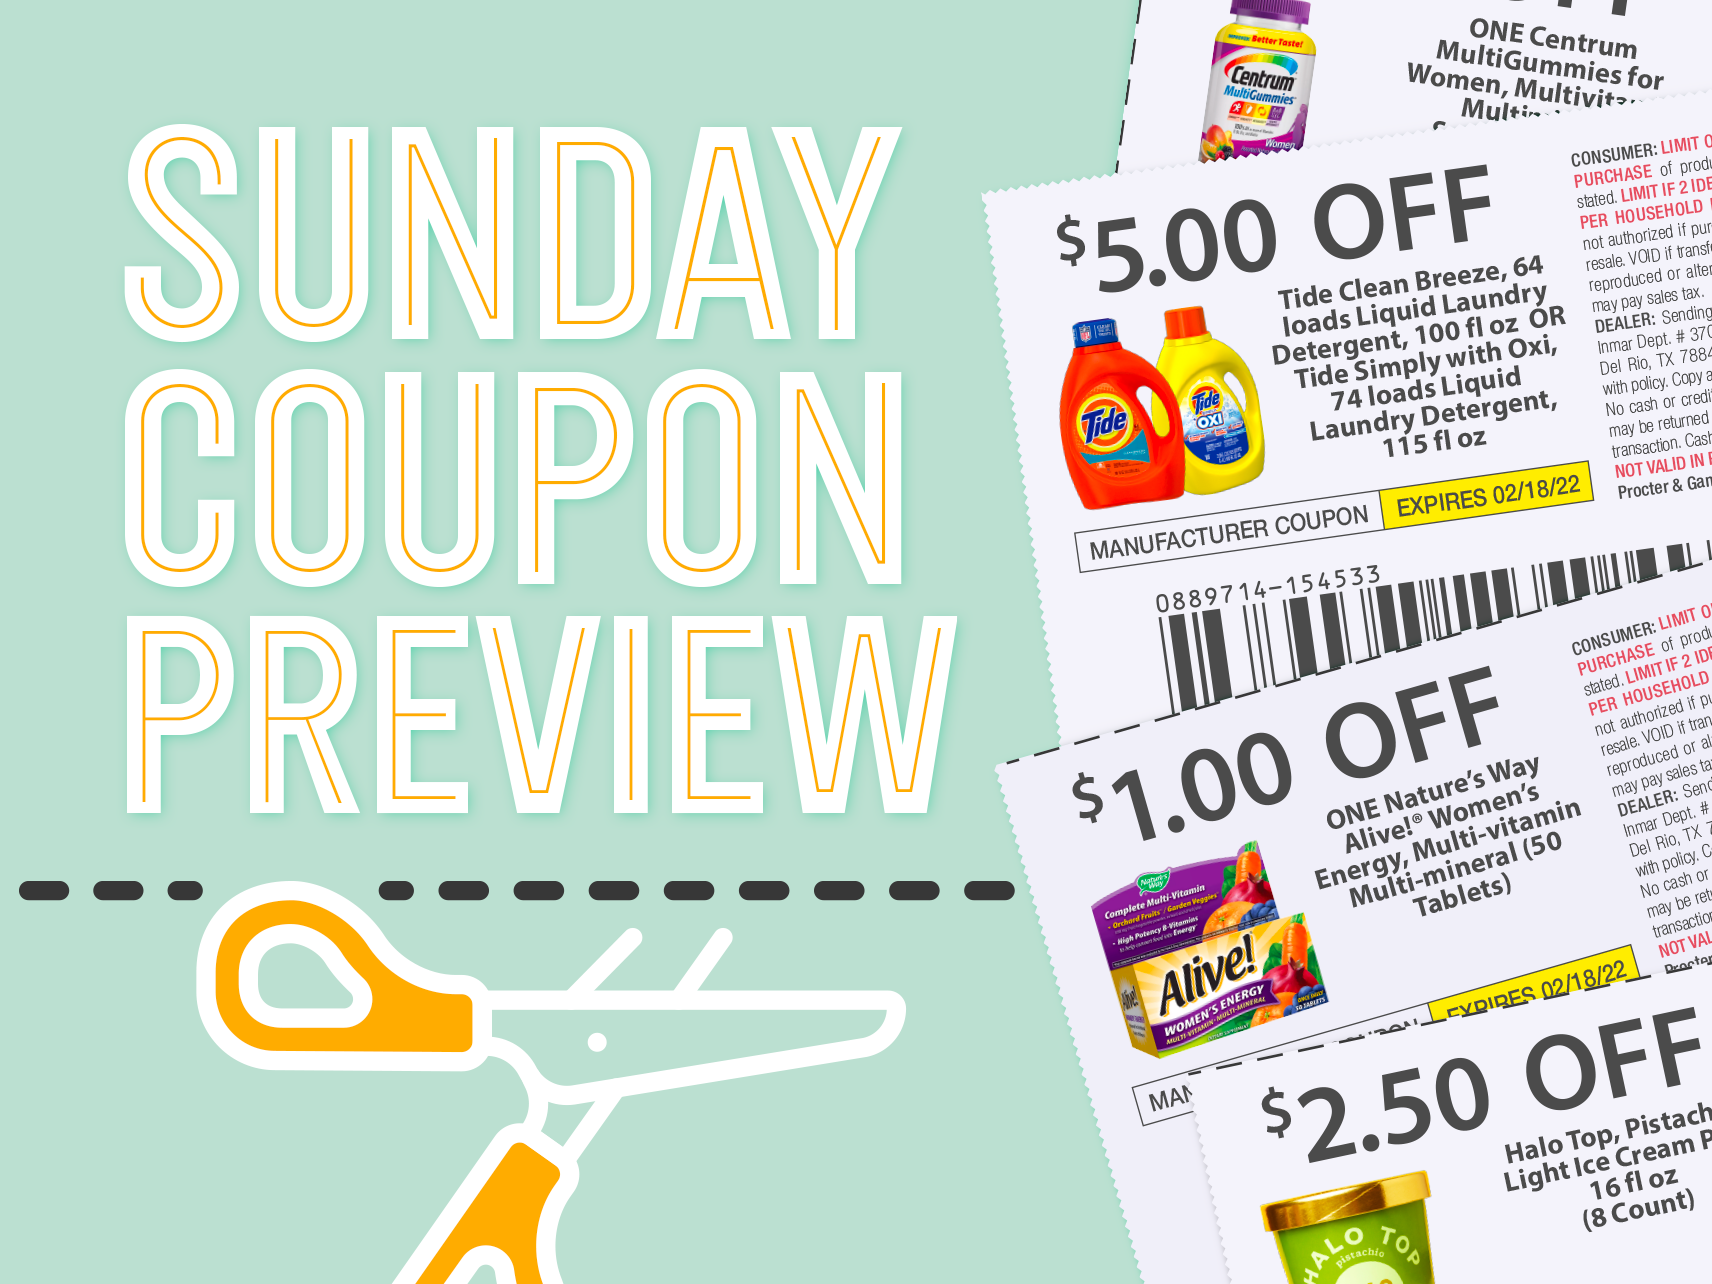 Sunday Coupon Preview For 7/31 – FOUR Inserts